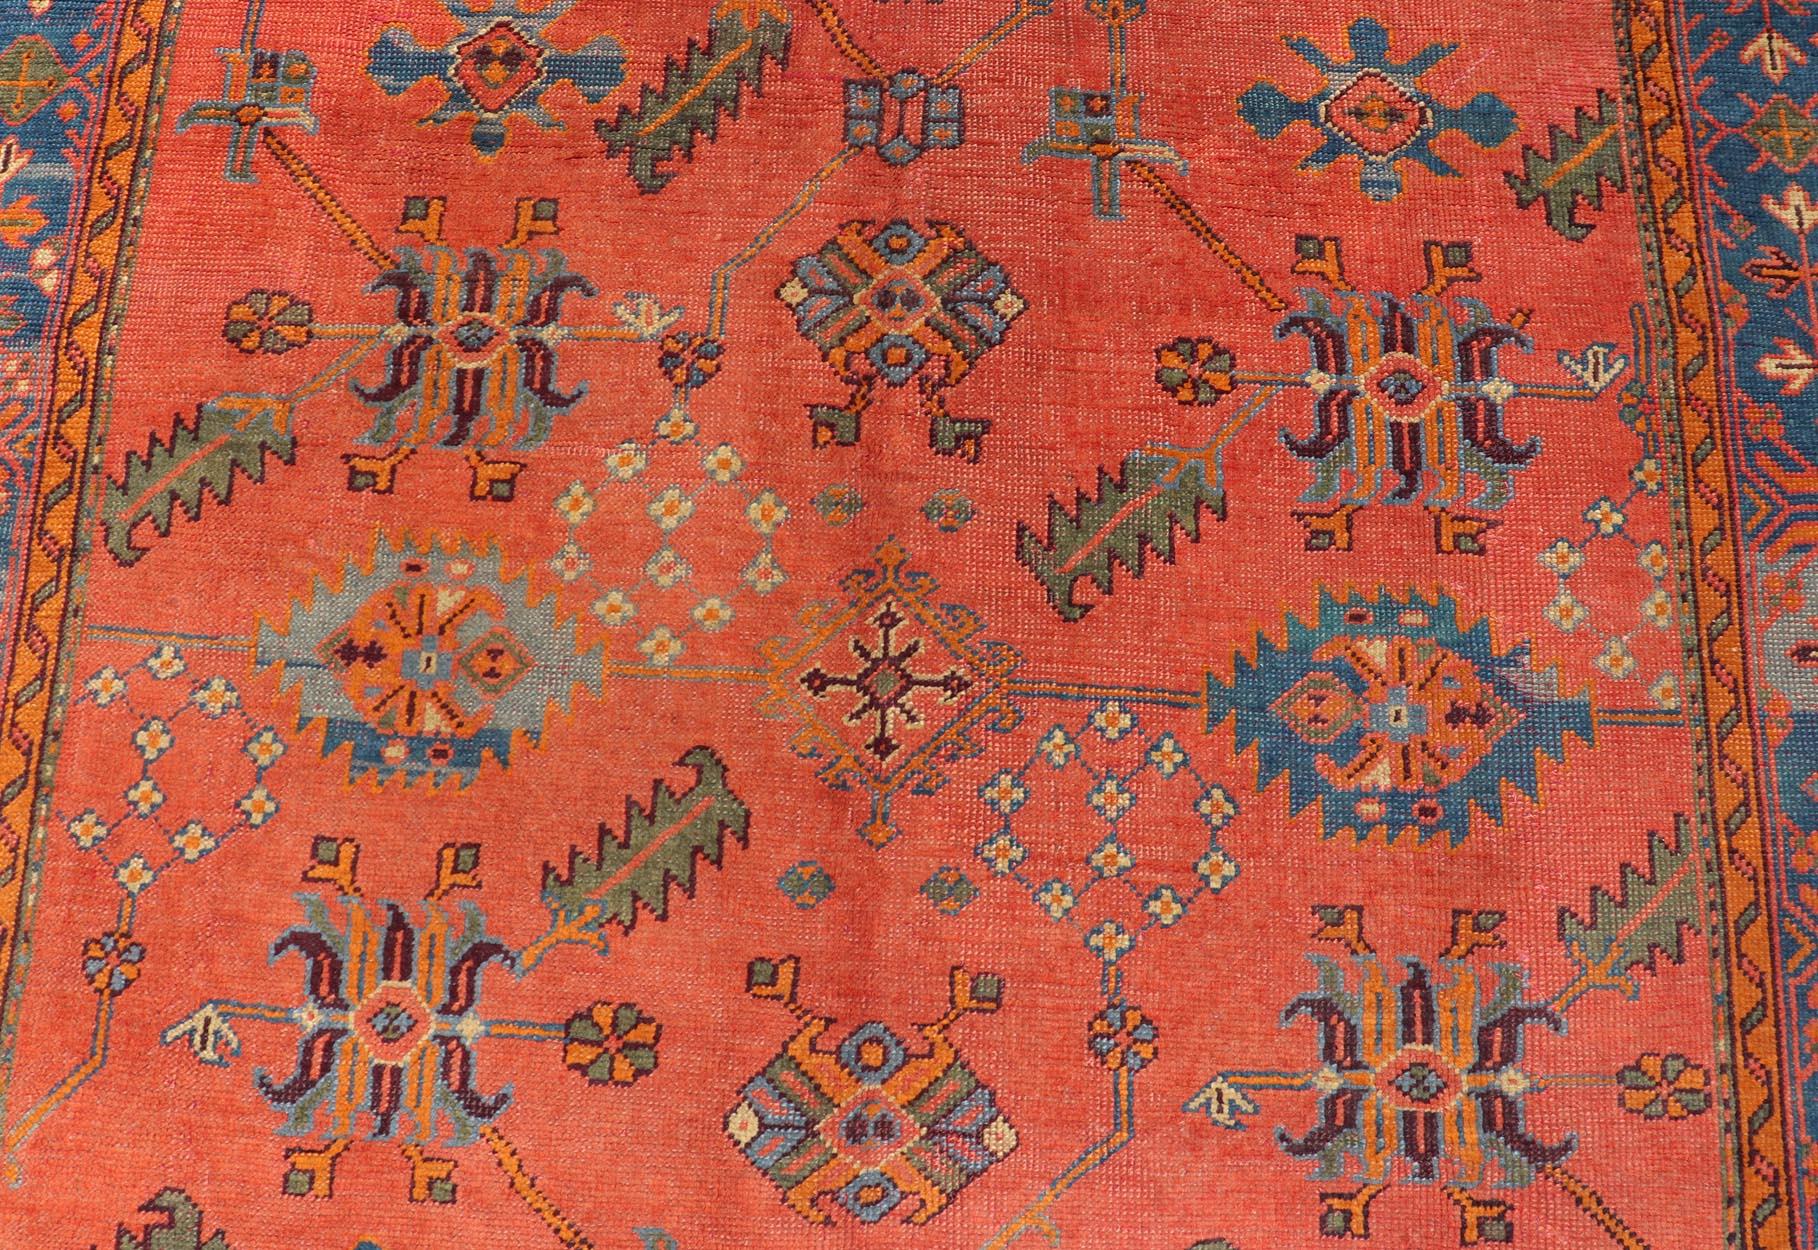 Antique Turkish Oushak Colorful Rug With All-Over Design In Salmon and Blue's  In Good Condition For Sale In Atlanta, GA